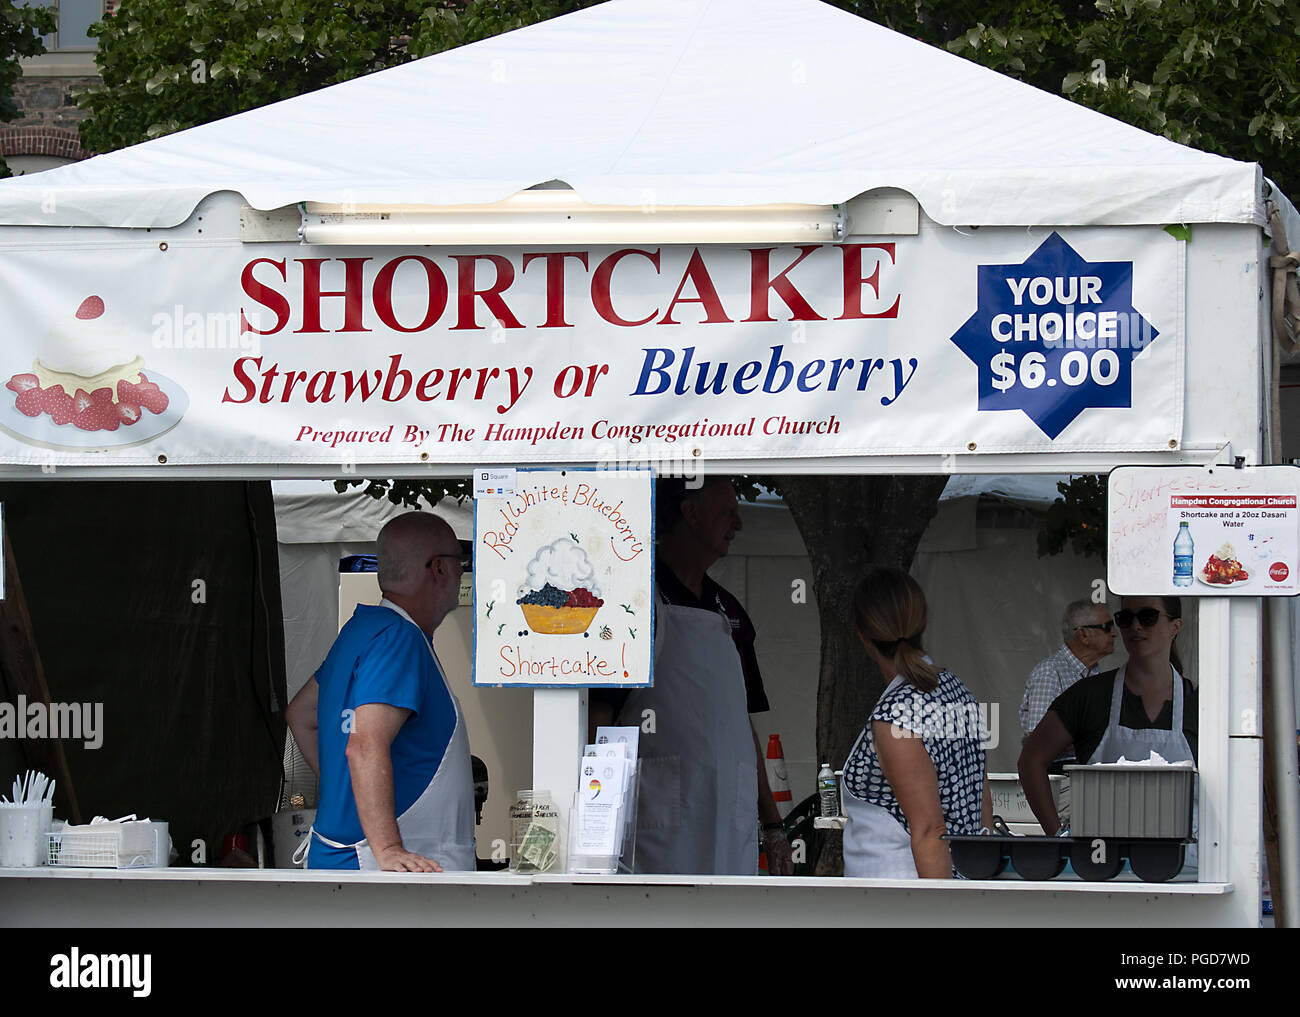 Bangor, Maine, USA.25th August, 2018. Food vendors at the American Folk Festival. This festival was named one of the world's best music festivals by Conde Nast Traveller. Located on the banks of the Penobscot River, the weather is almost always perfect, with a cool breeze and sunny skies. Tourists come from all over the world to listen to a variety of folk music and sample great food. Credit: Janet S. Robbins/Alamy Live News Stock Photo